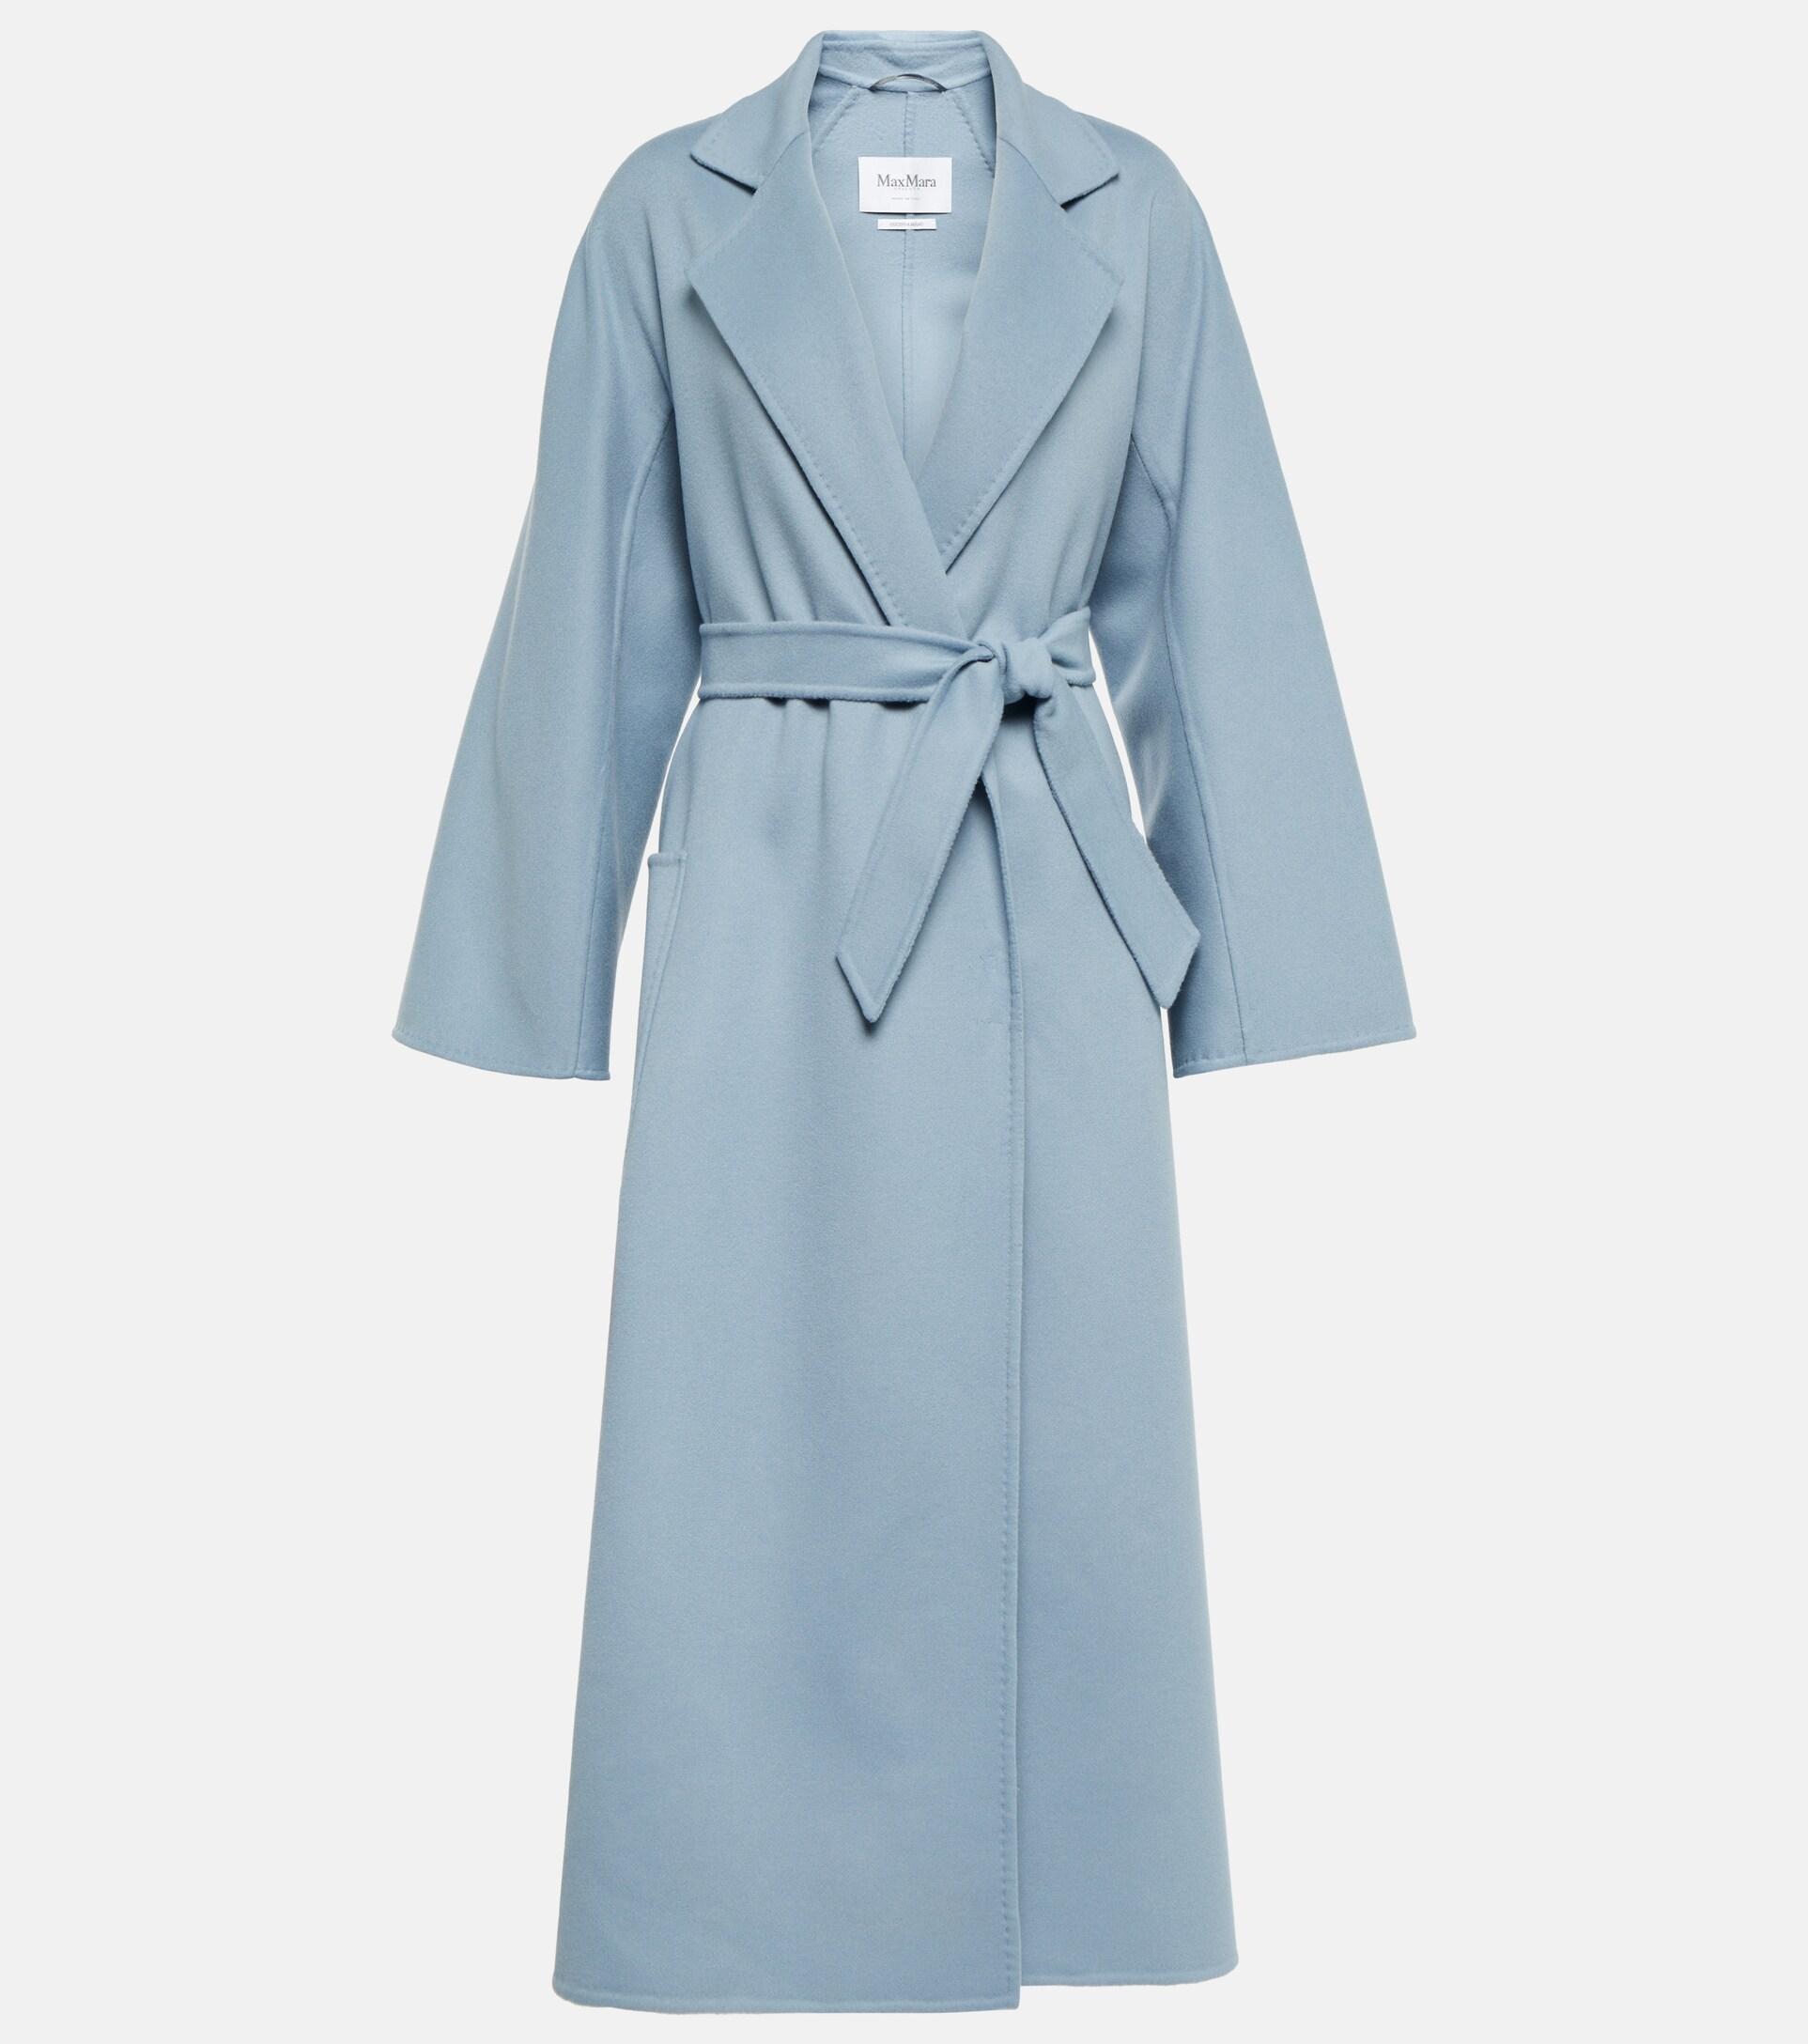 Max Mara Ludmilla Wool And Cashmere Coat in Blue | Lyst